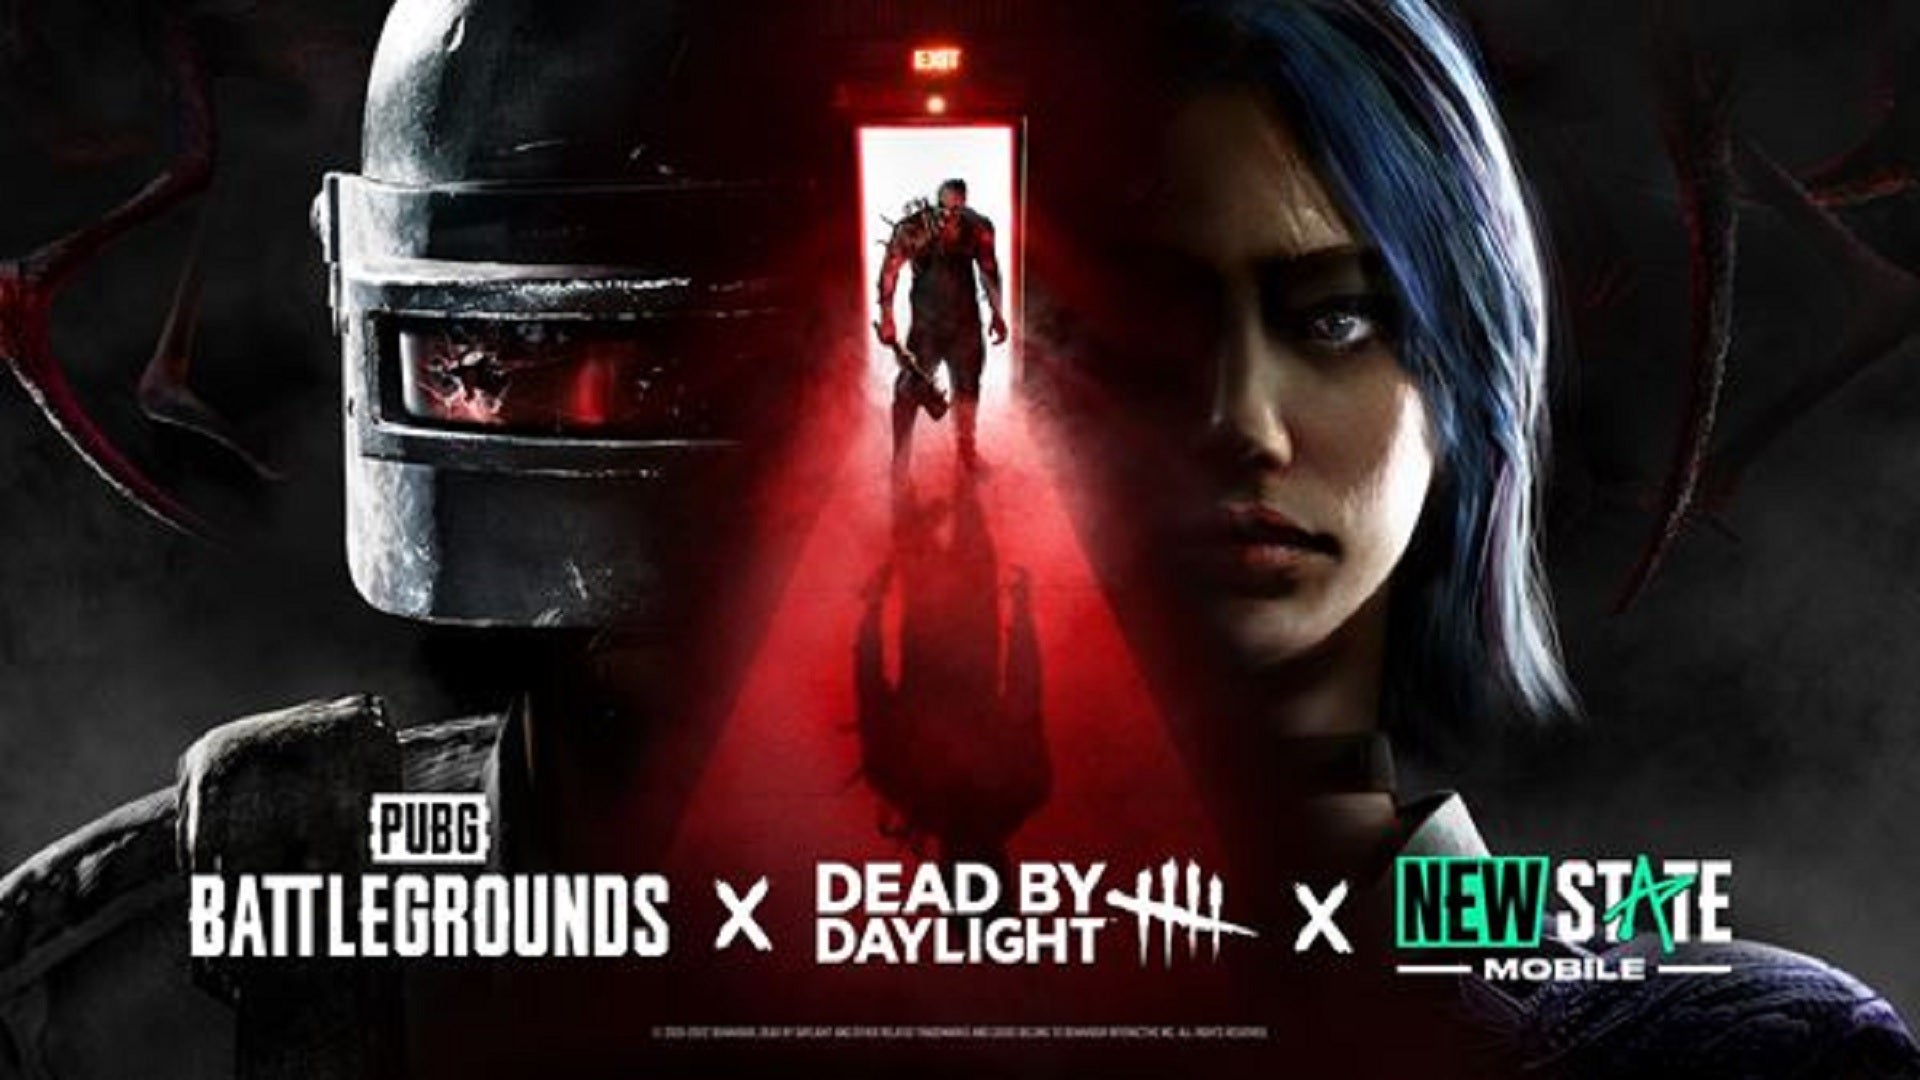 Official art for the PUBG x Dead by Daylight x New State crossover